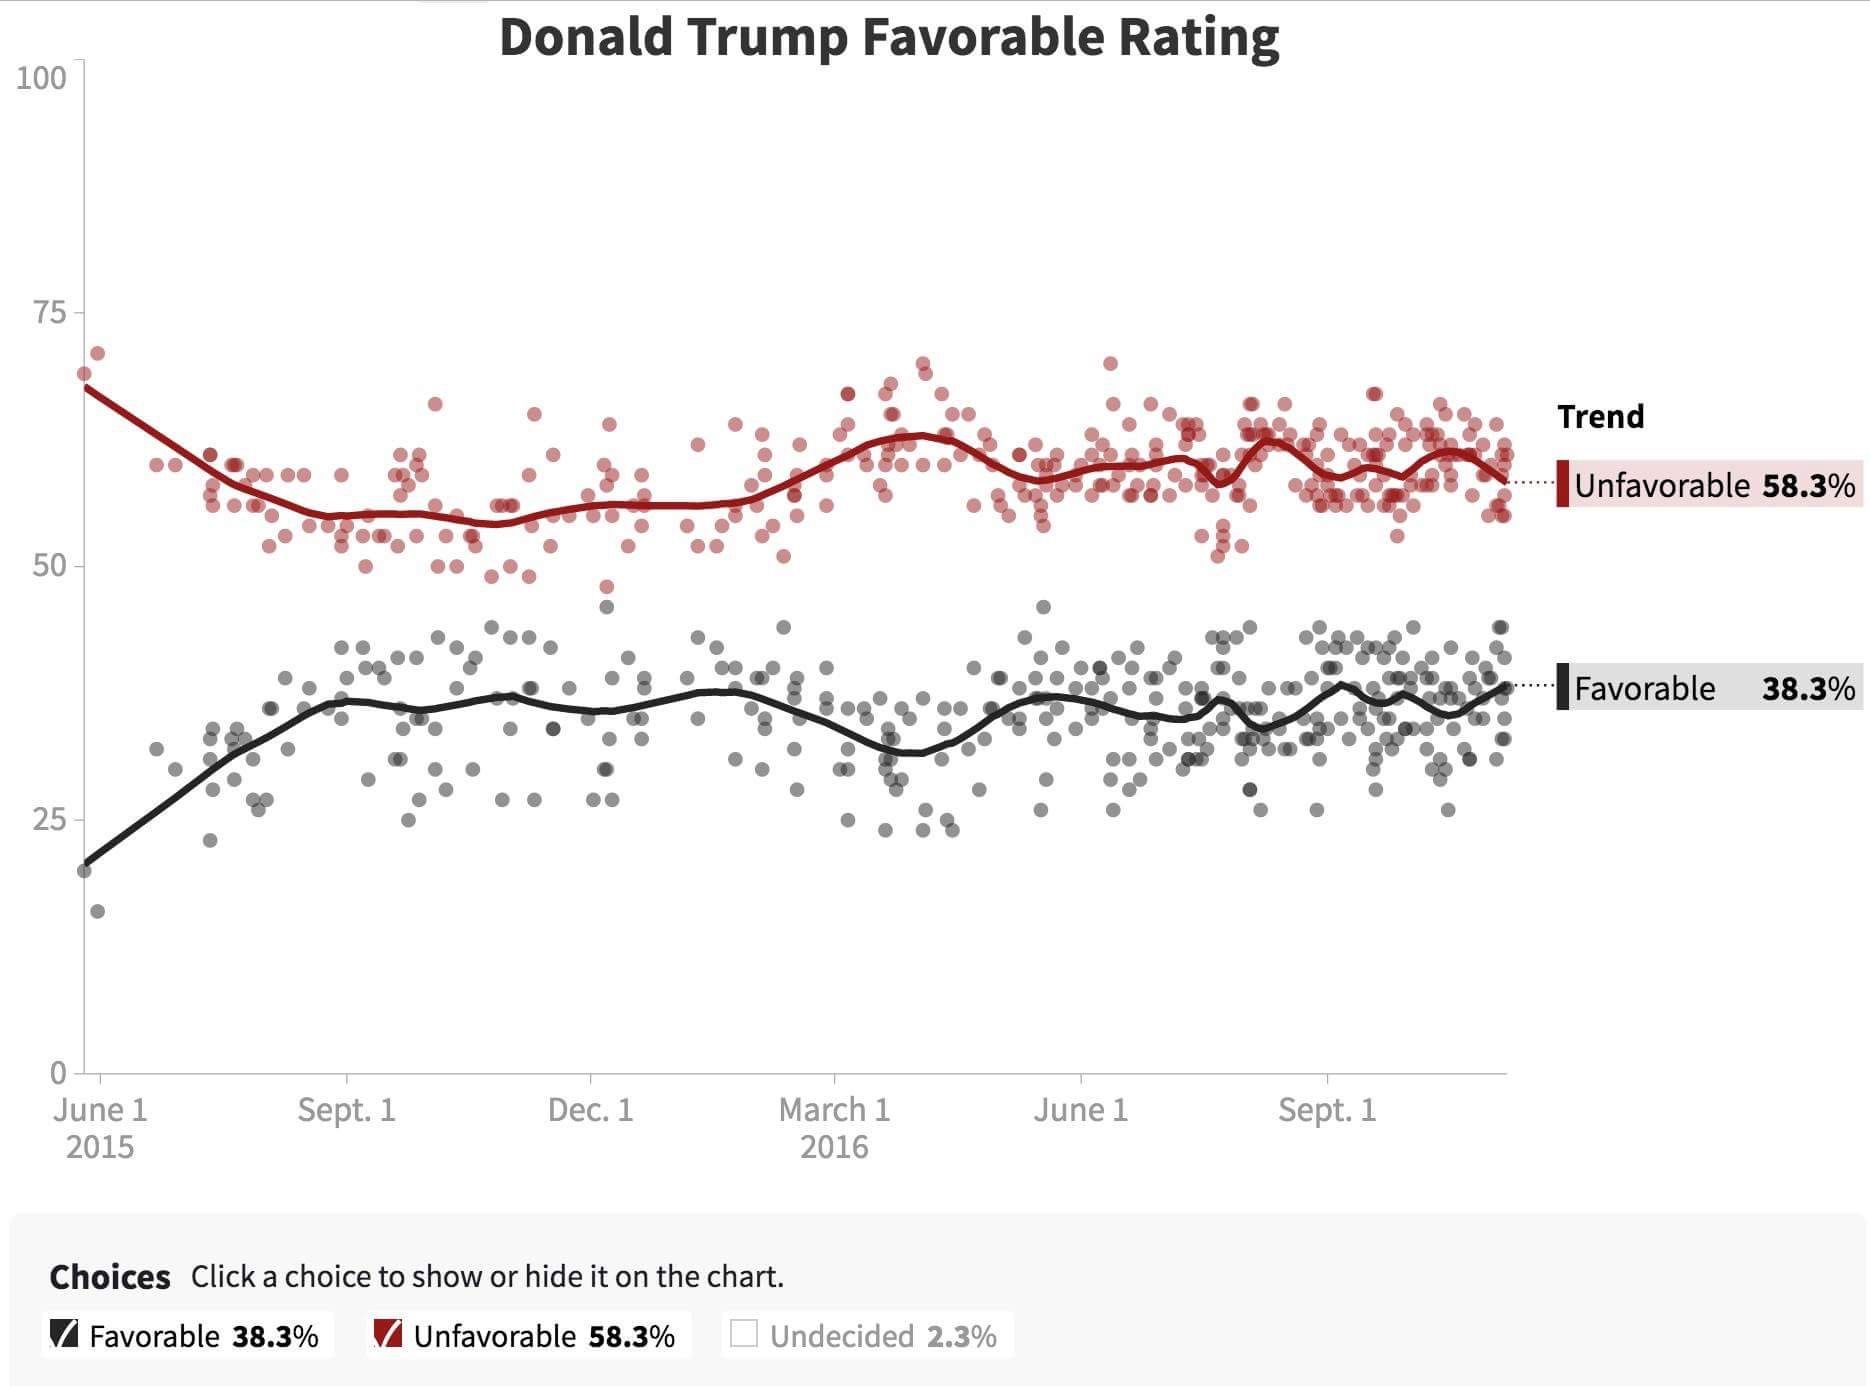 Trump’s favorable rating has inched up to 38%.